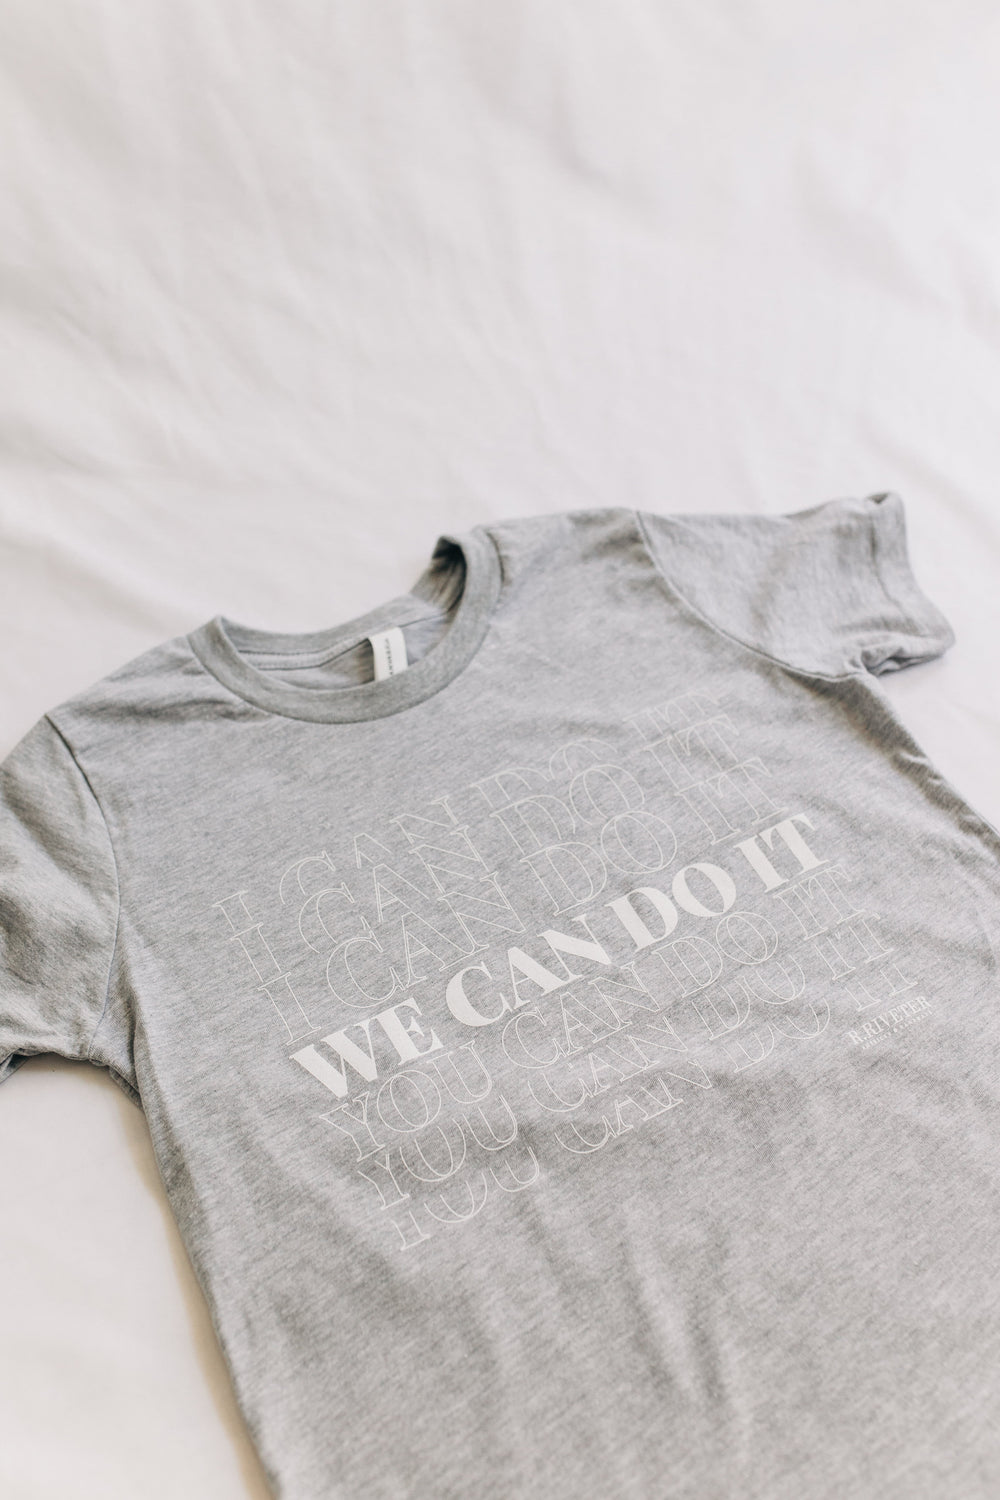 Youth Tee | We Can Do It! Grey Clothing